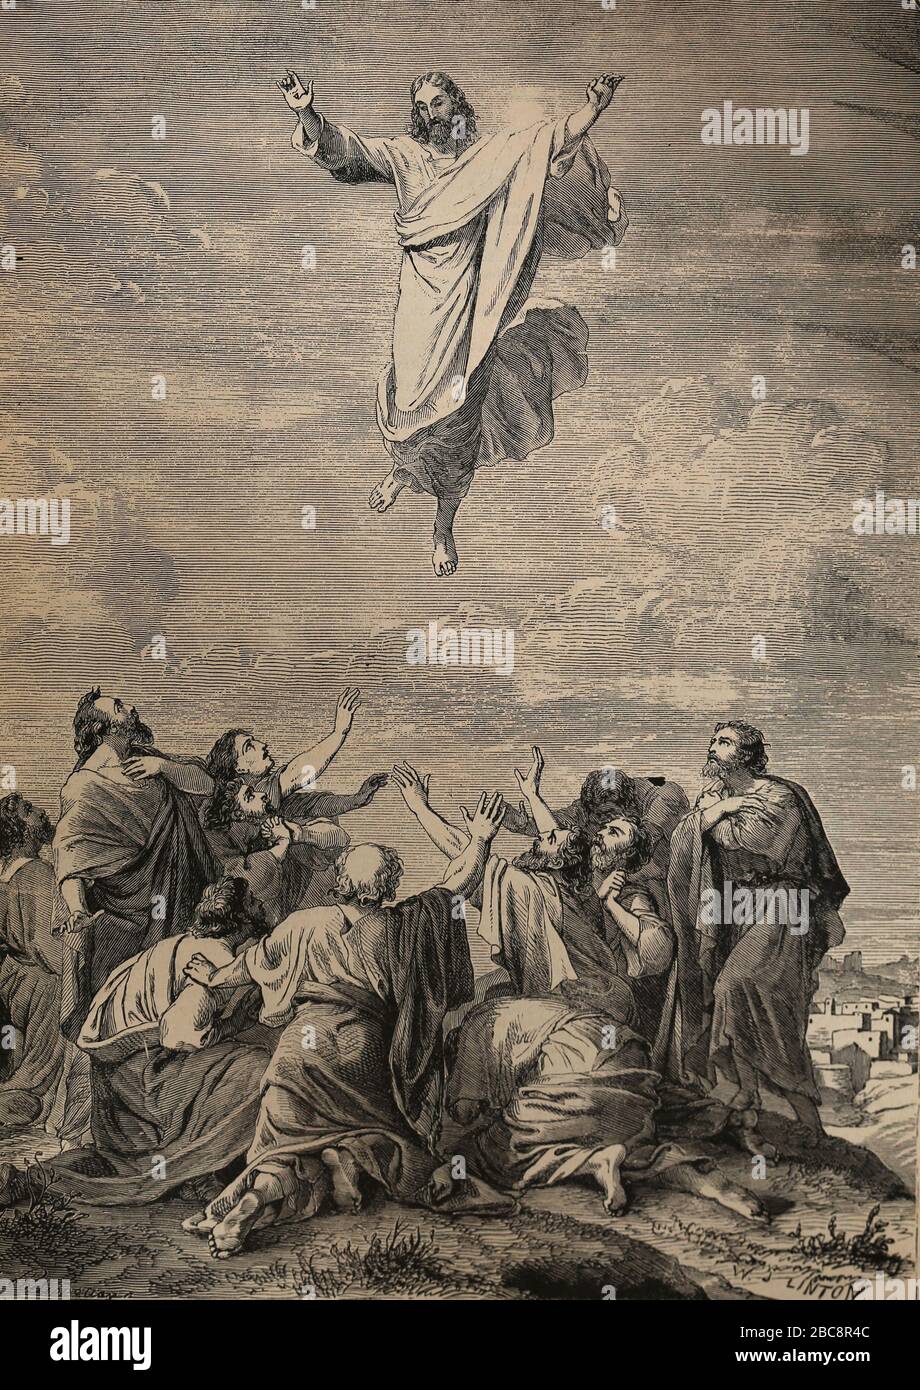 The Ascension of Jesus. Engraving. Holy Bible, 19th century. Stock Photo